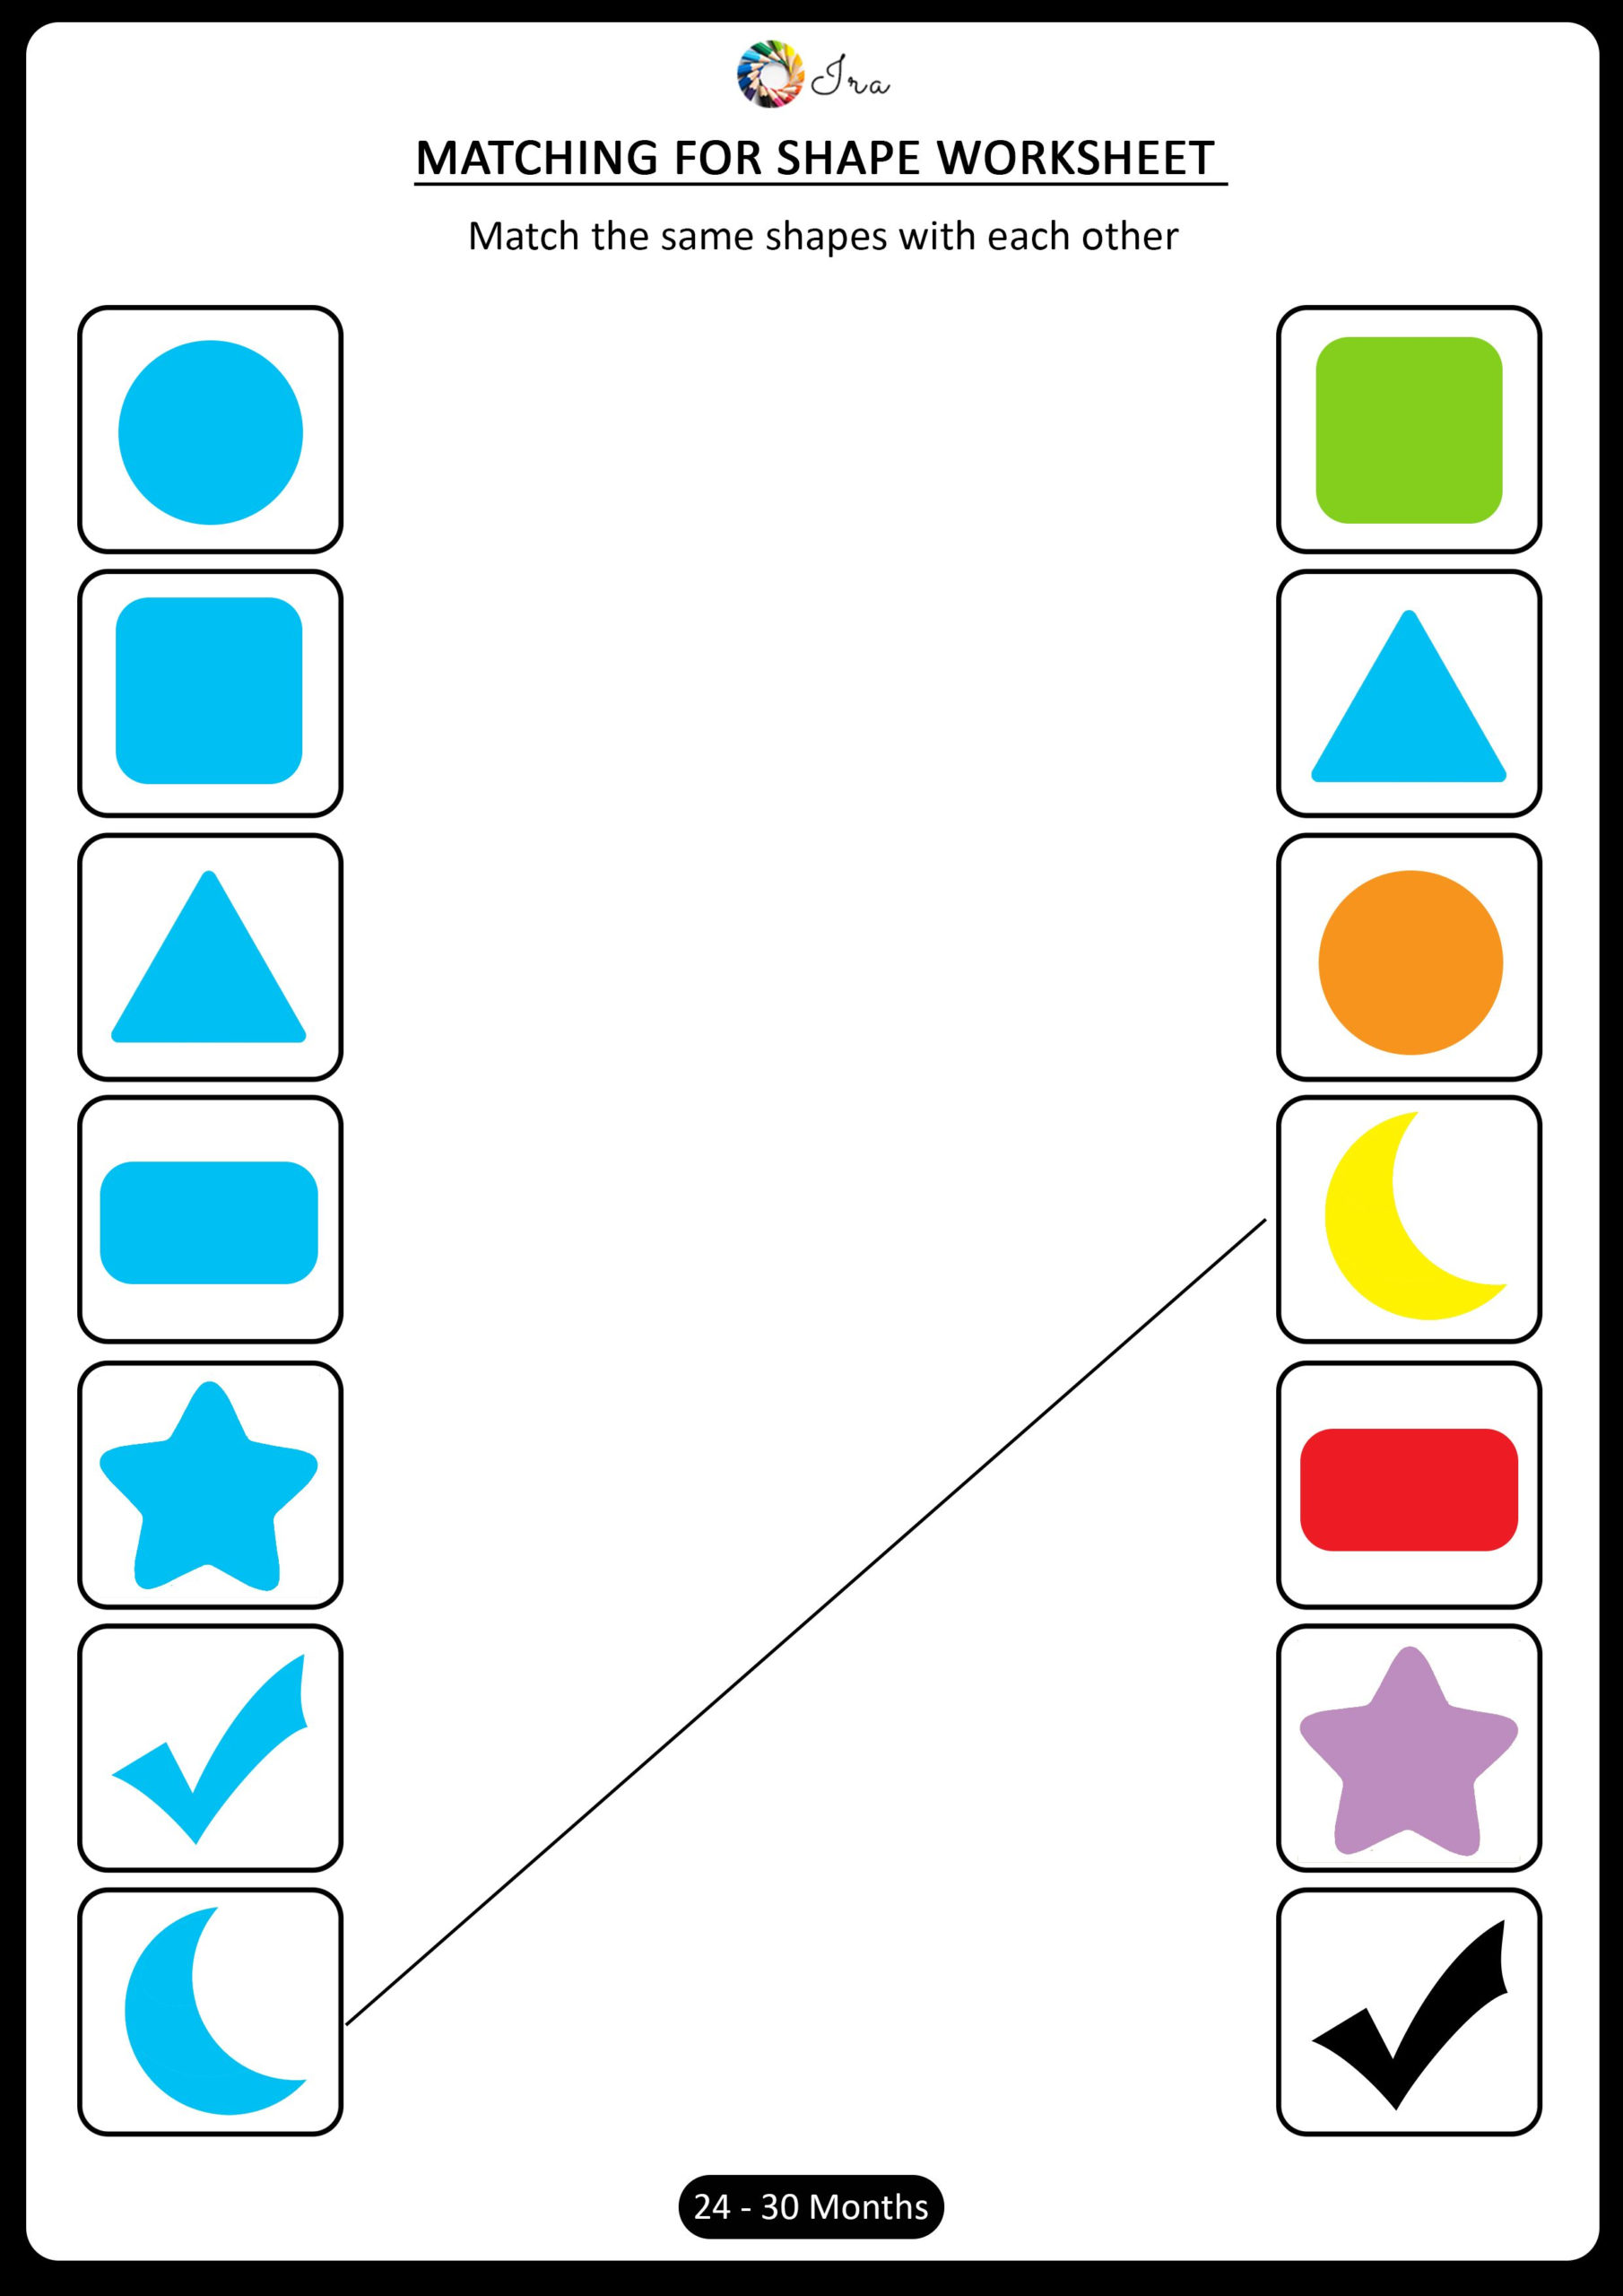 Free Printable Matching Shapes Worksheets For 24 30 Months Ira 